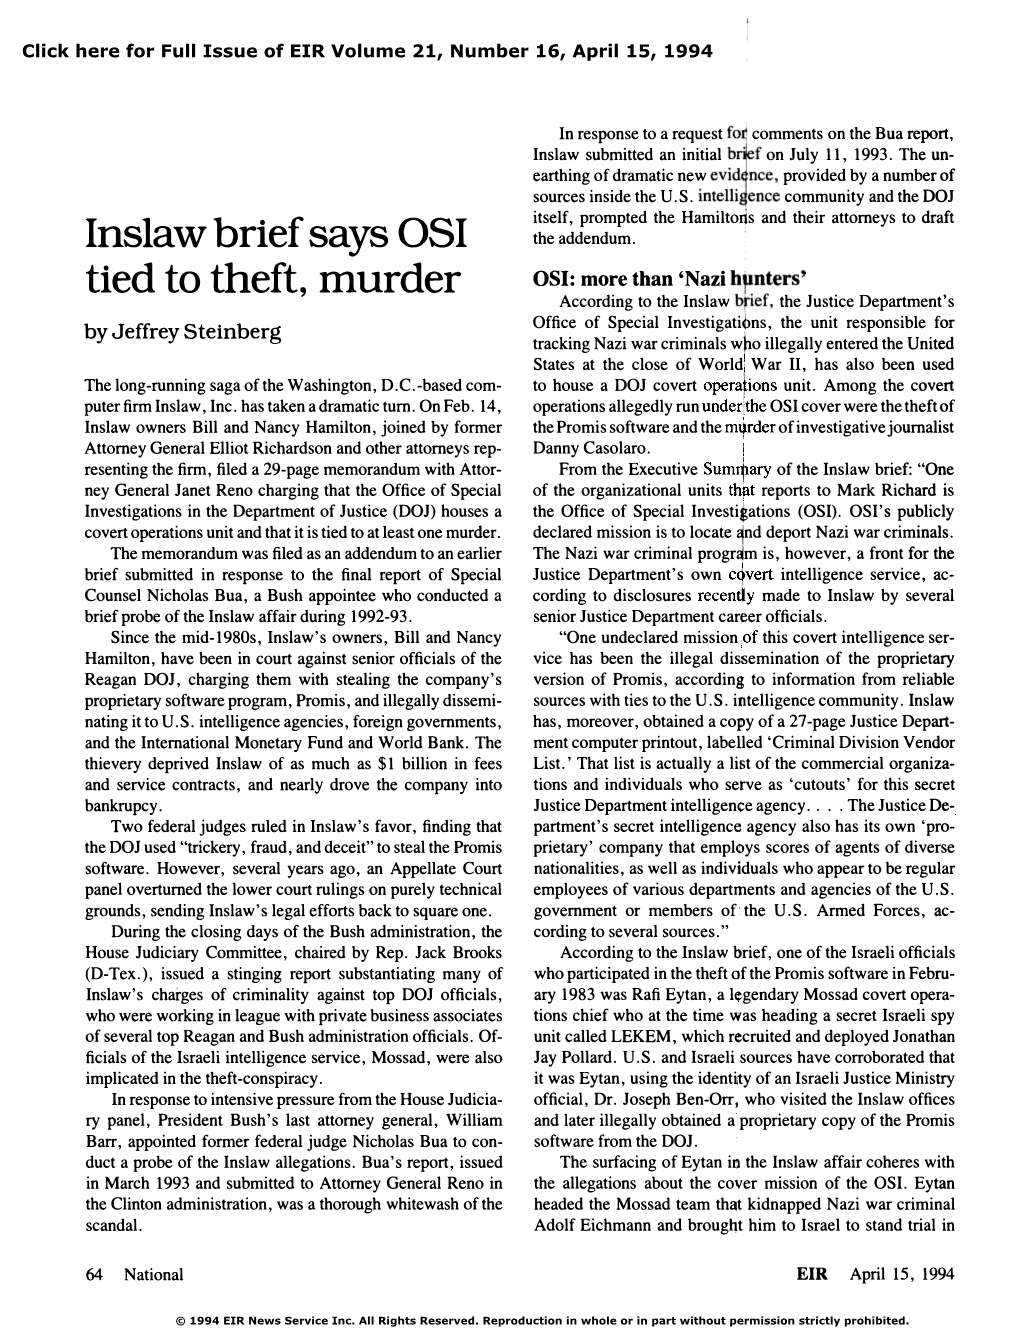 Inslaw Brief Says OSI Tied to Theft, Murder